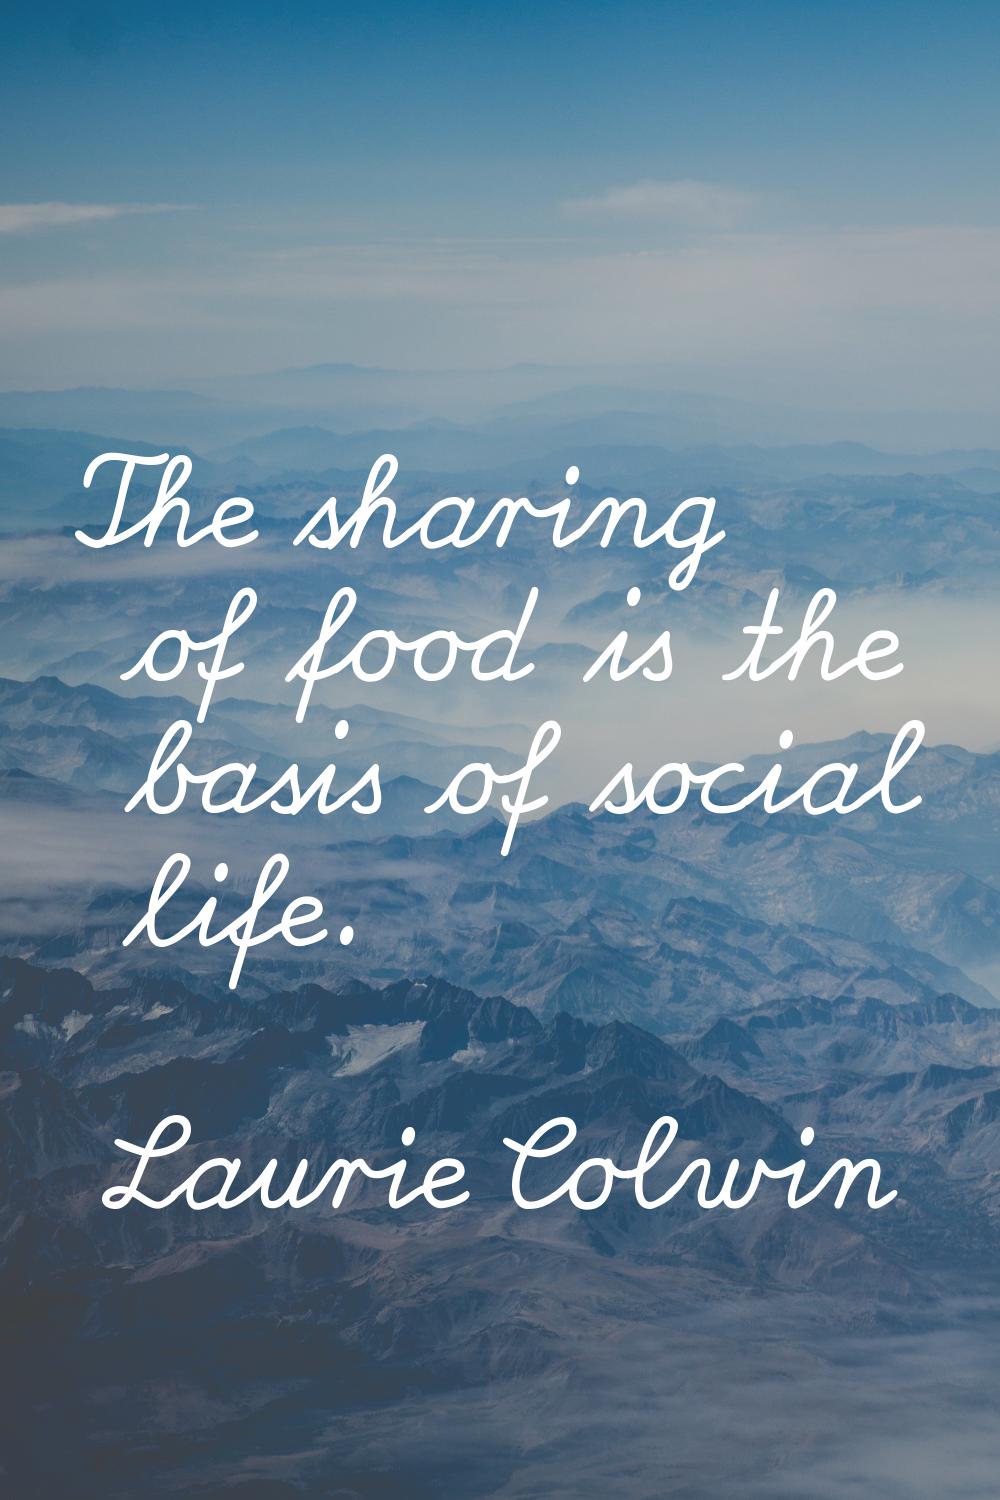 The sharing of food is the basis of social life.